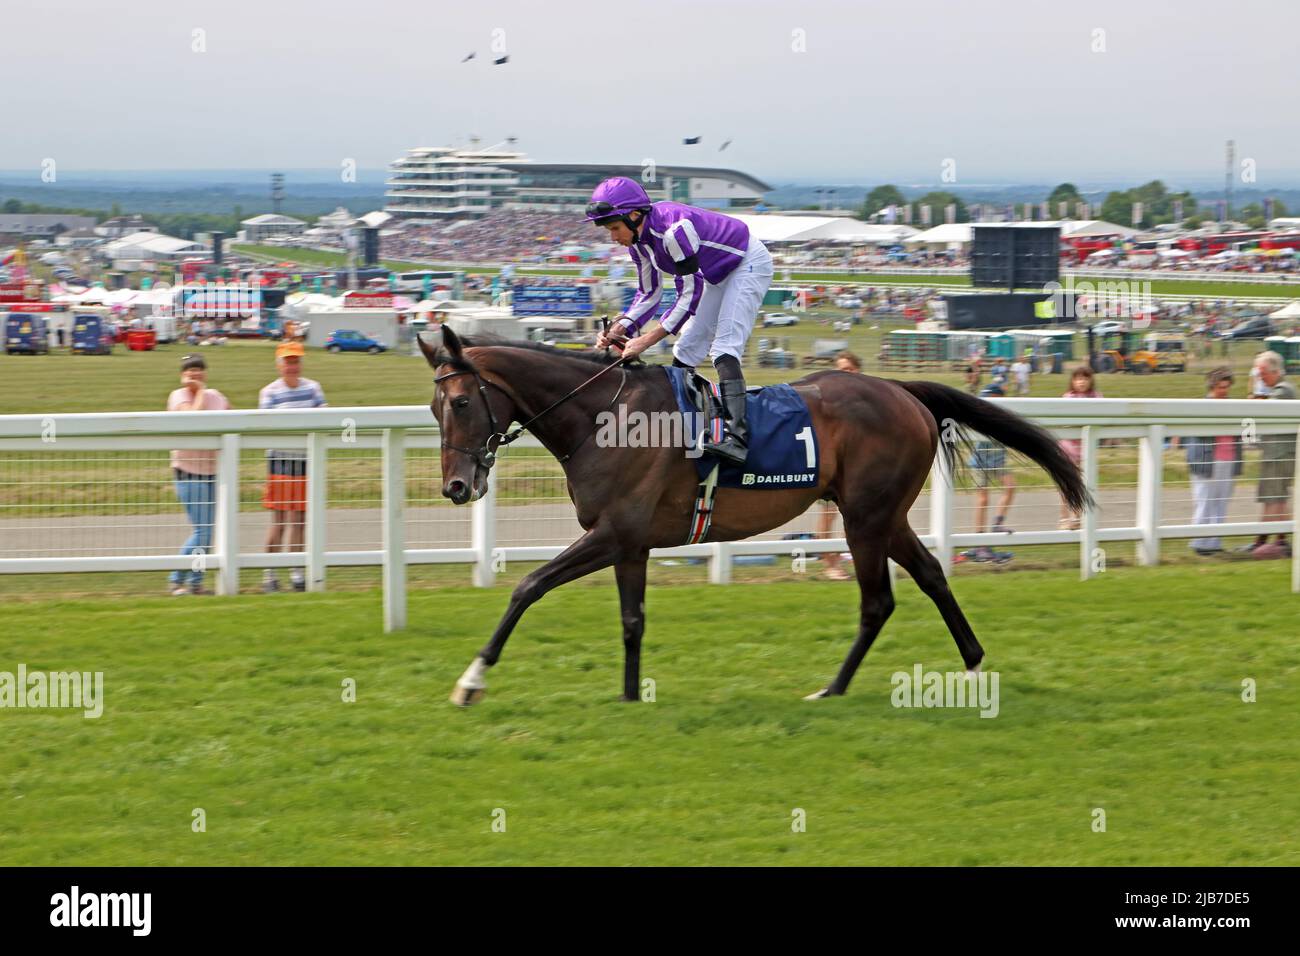 Epsom Downs, Surrey, England, UK. 3rd June, 2022. No1 High Definition ridden by Ryan Moore finished third in the Coronation Cup at Epsom Downs in Surrey, part of the Platinum Jubilee weekend celebrations for the 70 year reign of the British monarch Queen Elizabeth II. Credit: Julia Gavin/Alamy Live News Stock Photo